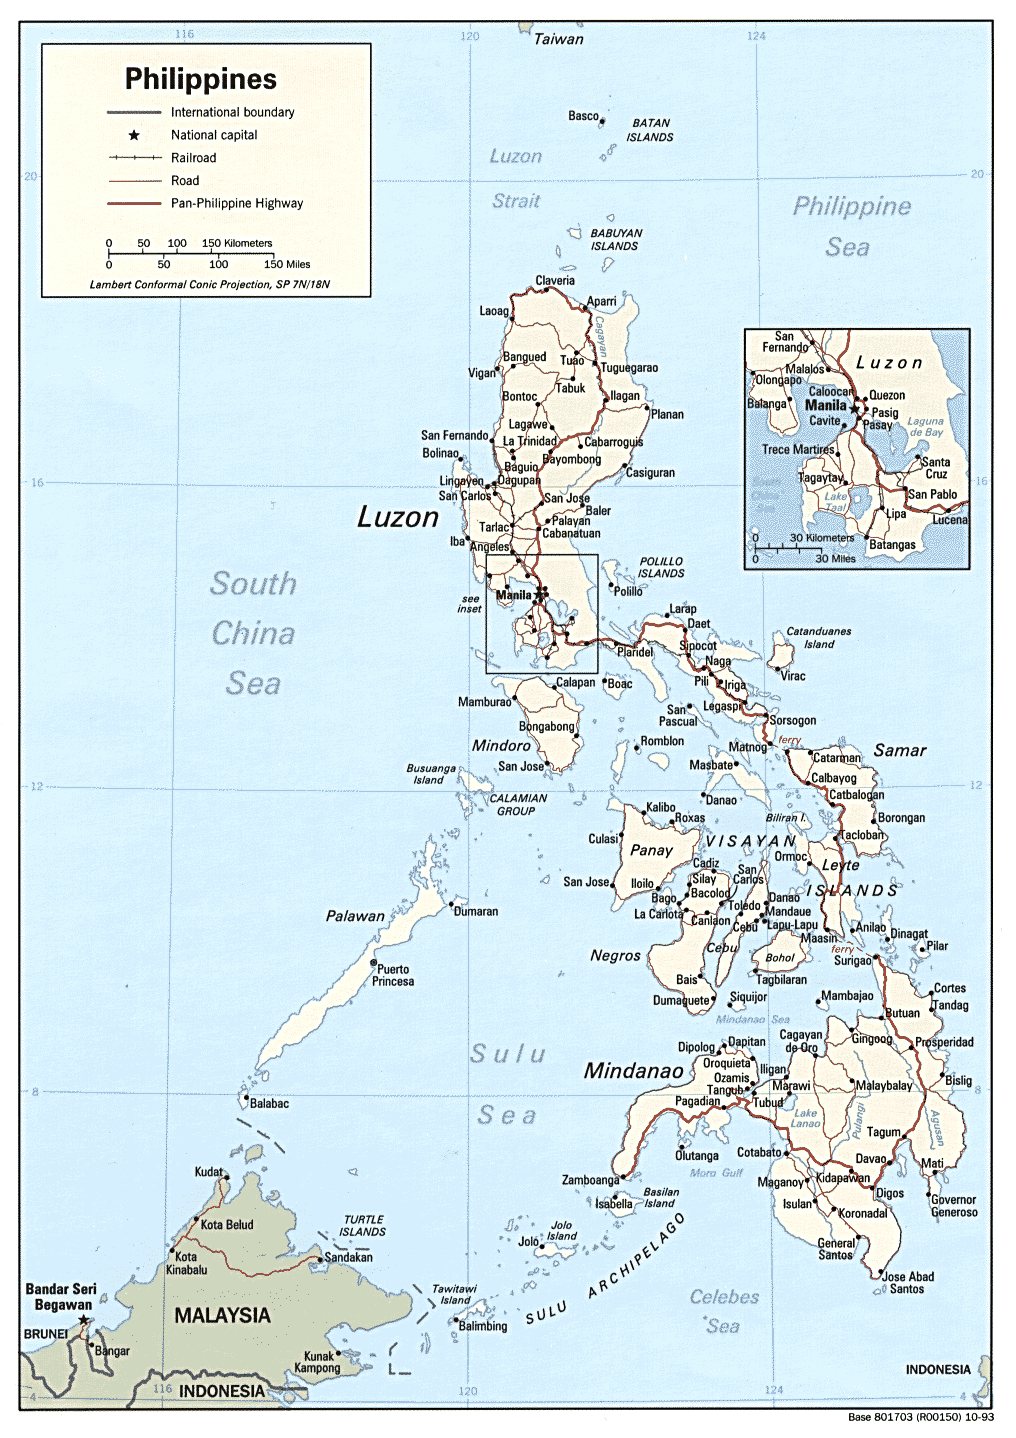 Map and Facts About the Philippines